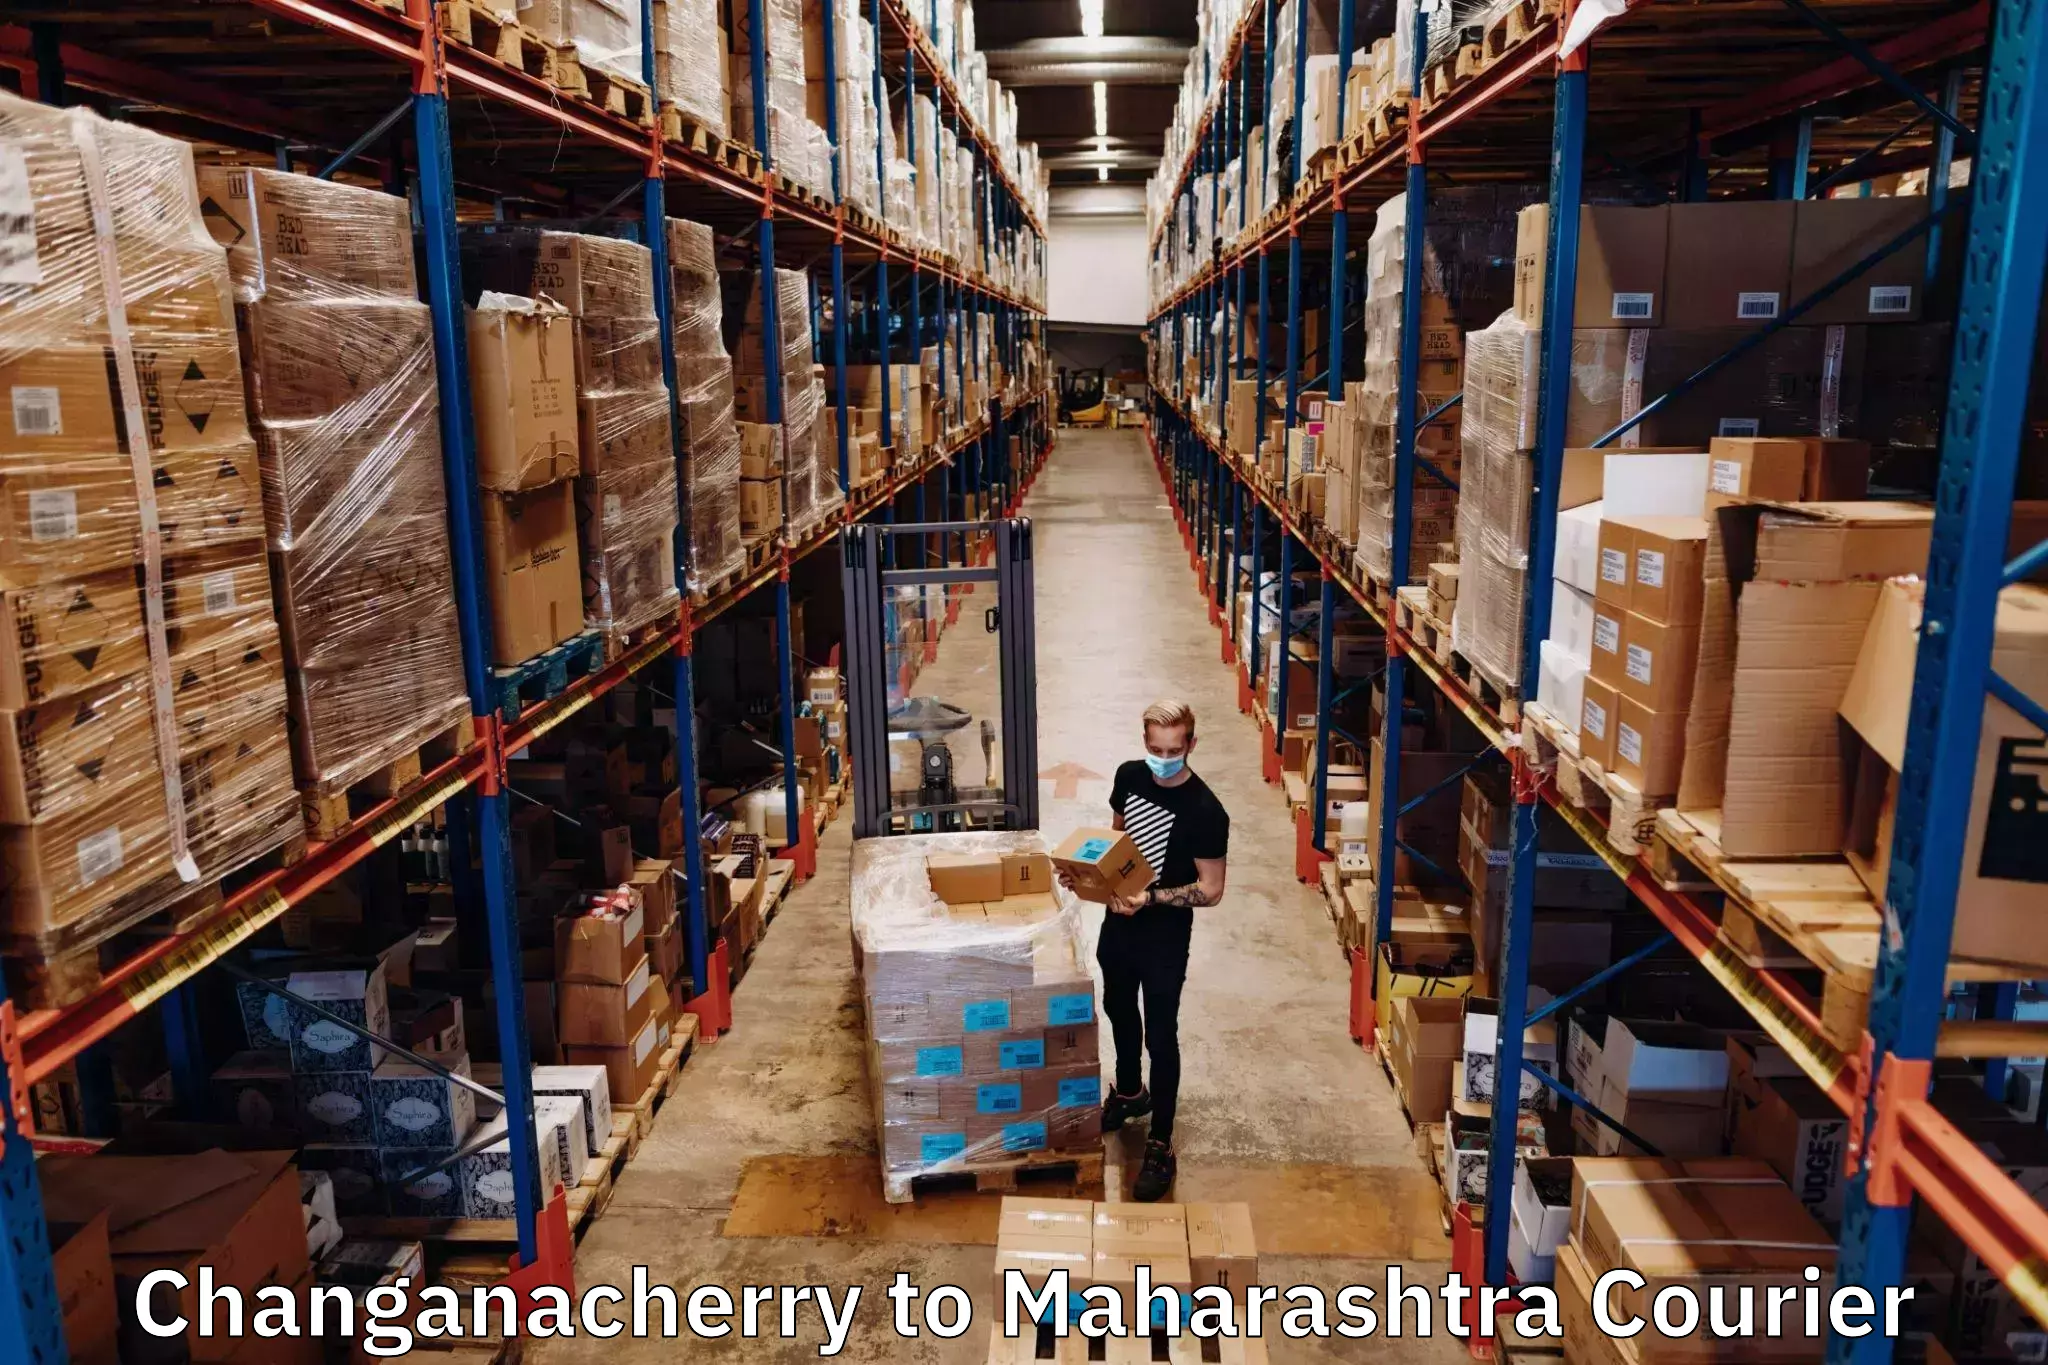 Multi-national courier services Changanacherry to Lonavala